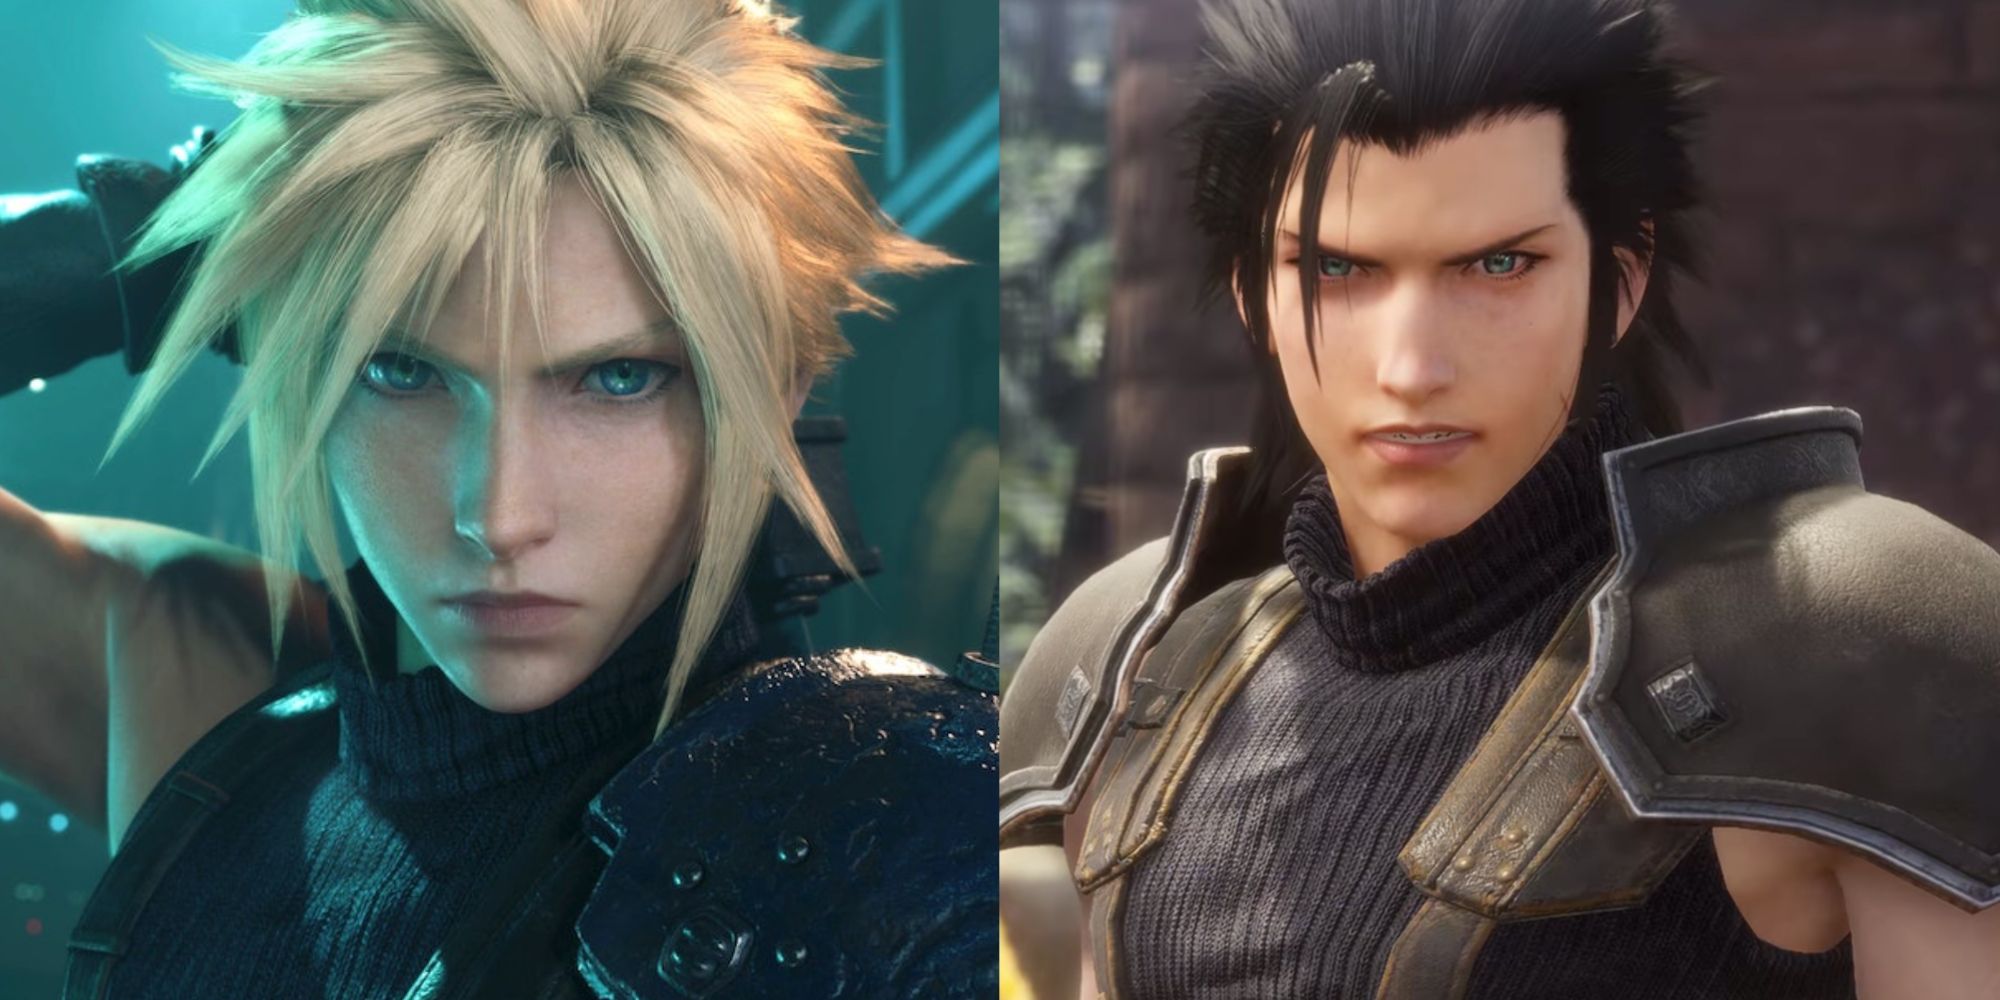 Featured Image for Cloud Strife Vs. Zack Fair - Who's The Better Final Fantasy 7 Protagonist